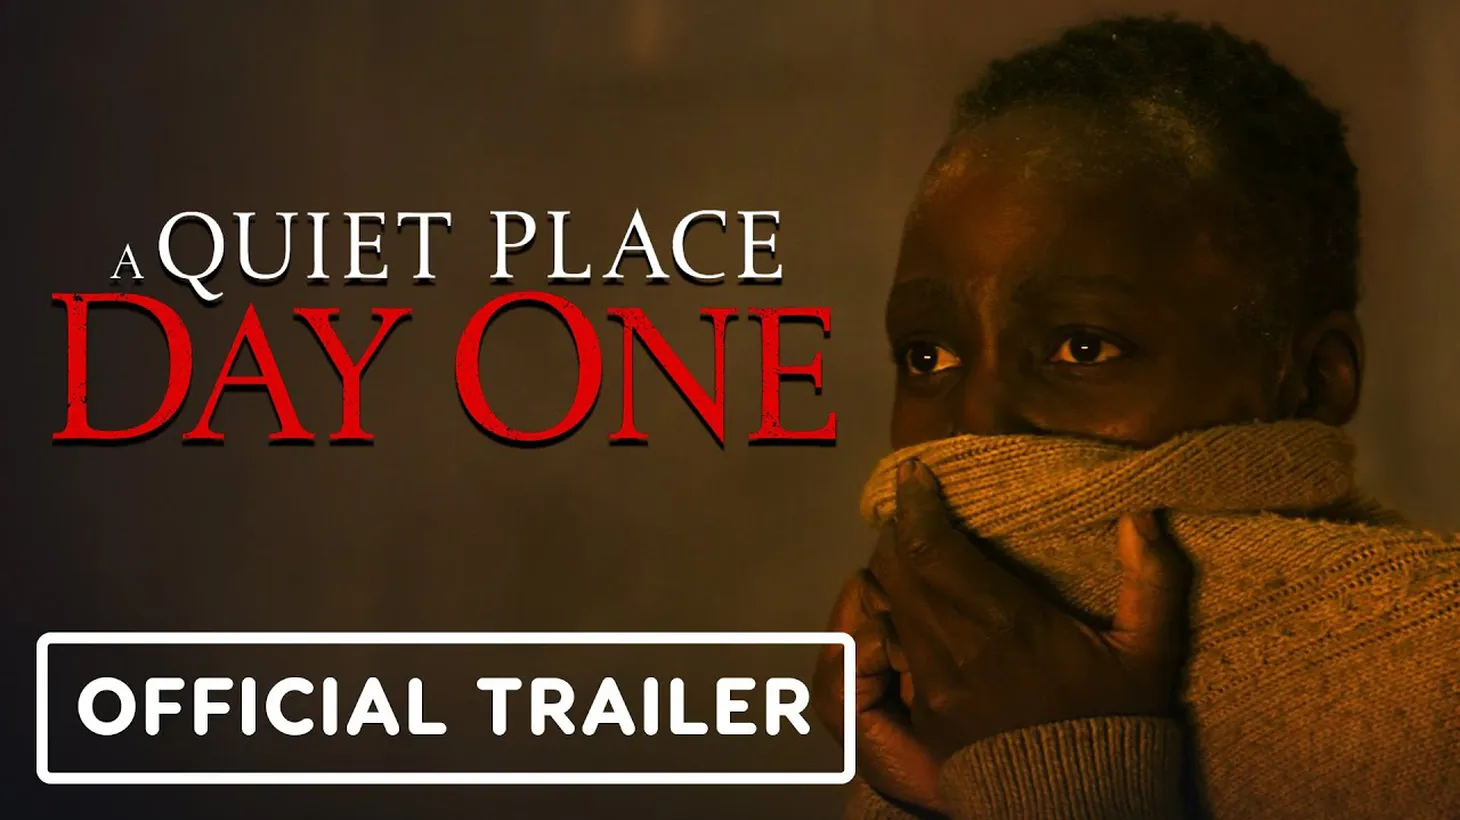 “A Quiet Place: Day One” stars Lupita Nyong’o, Joseph Quinn, and Alex Wolff.